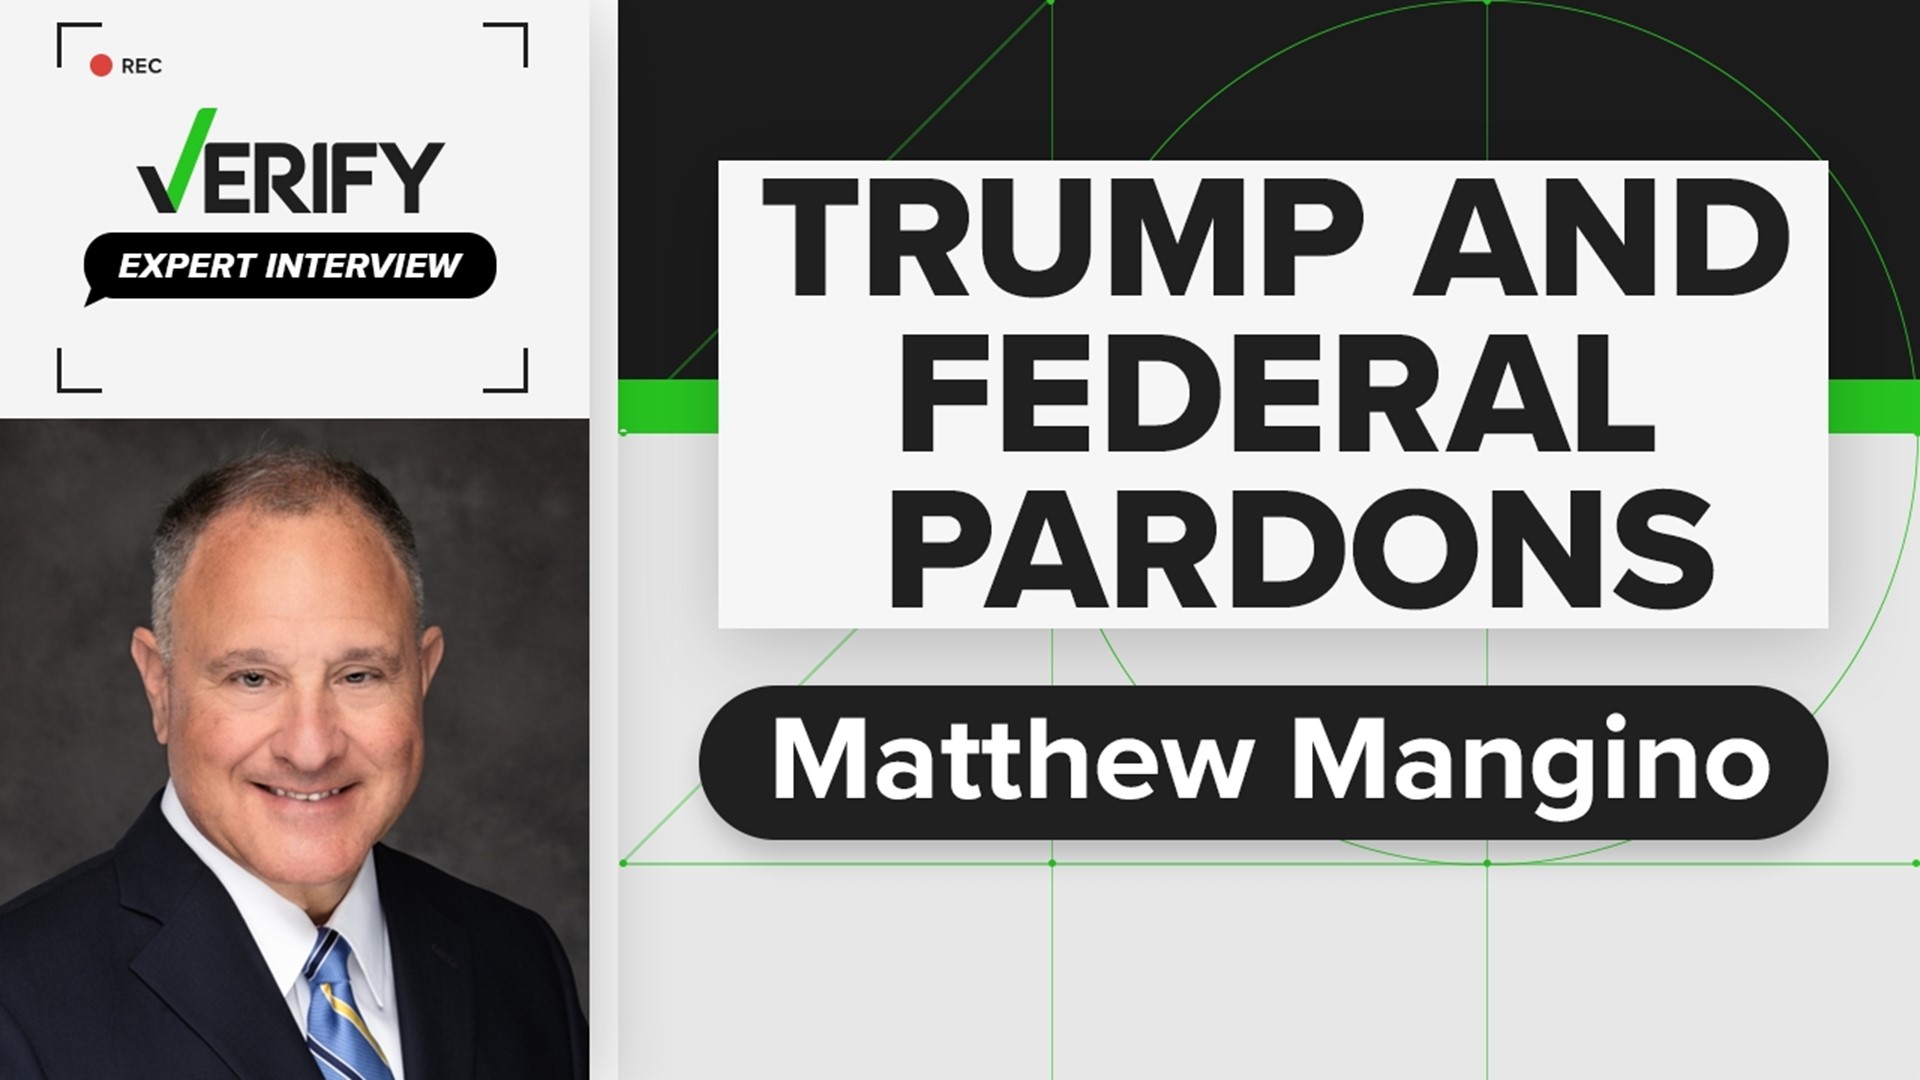 Matthew Mangino is an attorney at Luxenberg Garbett Kelly & George. He explains the issue of former President Trump’s attempts to pardon himself from federal charges